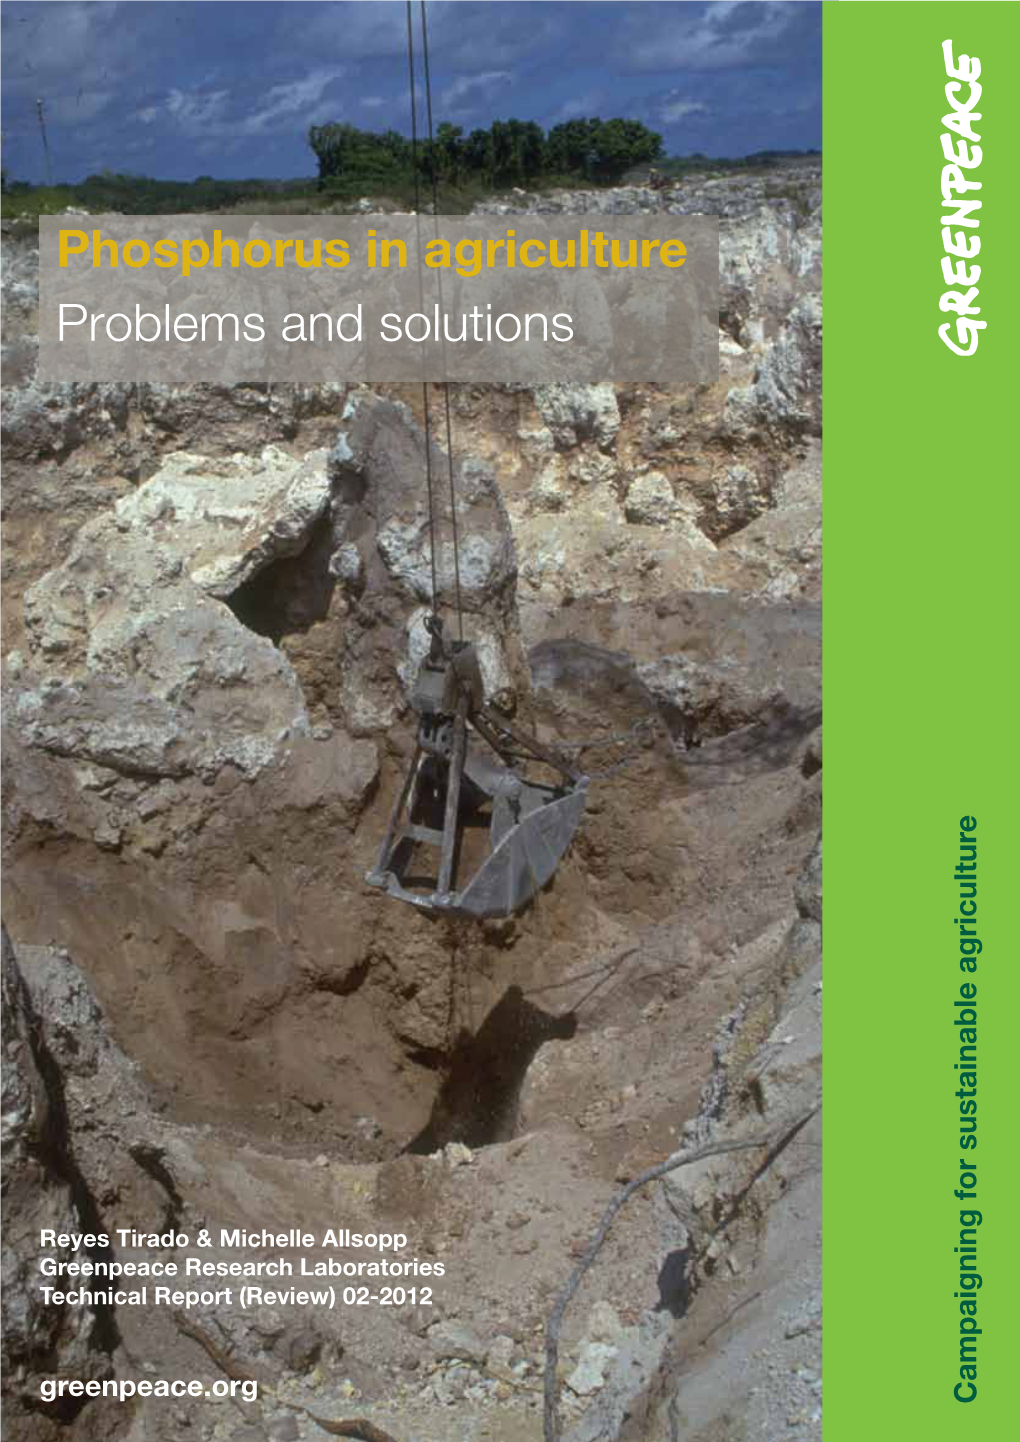 Phosphorus in Agriculture Problems and Solutions Greenpeace Phosphorus in Executive International Agriculture Summary Problems and Solutions